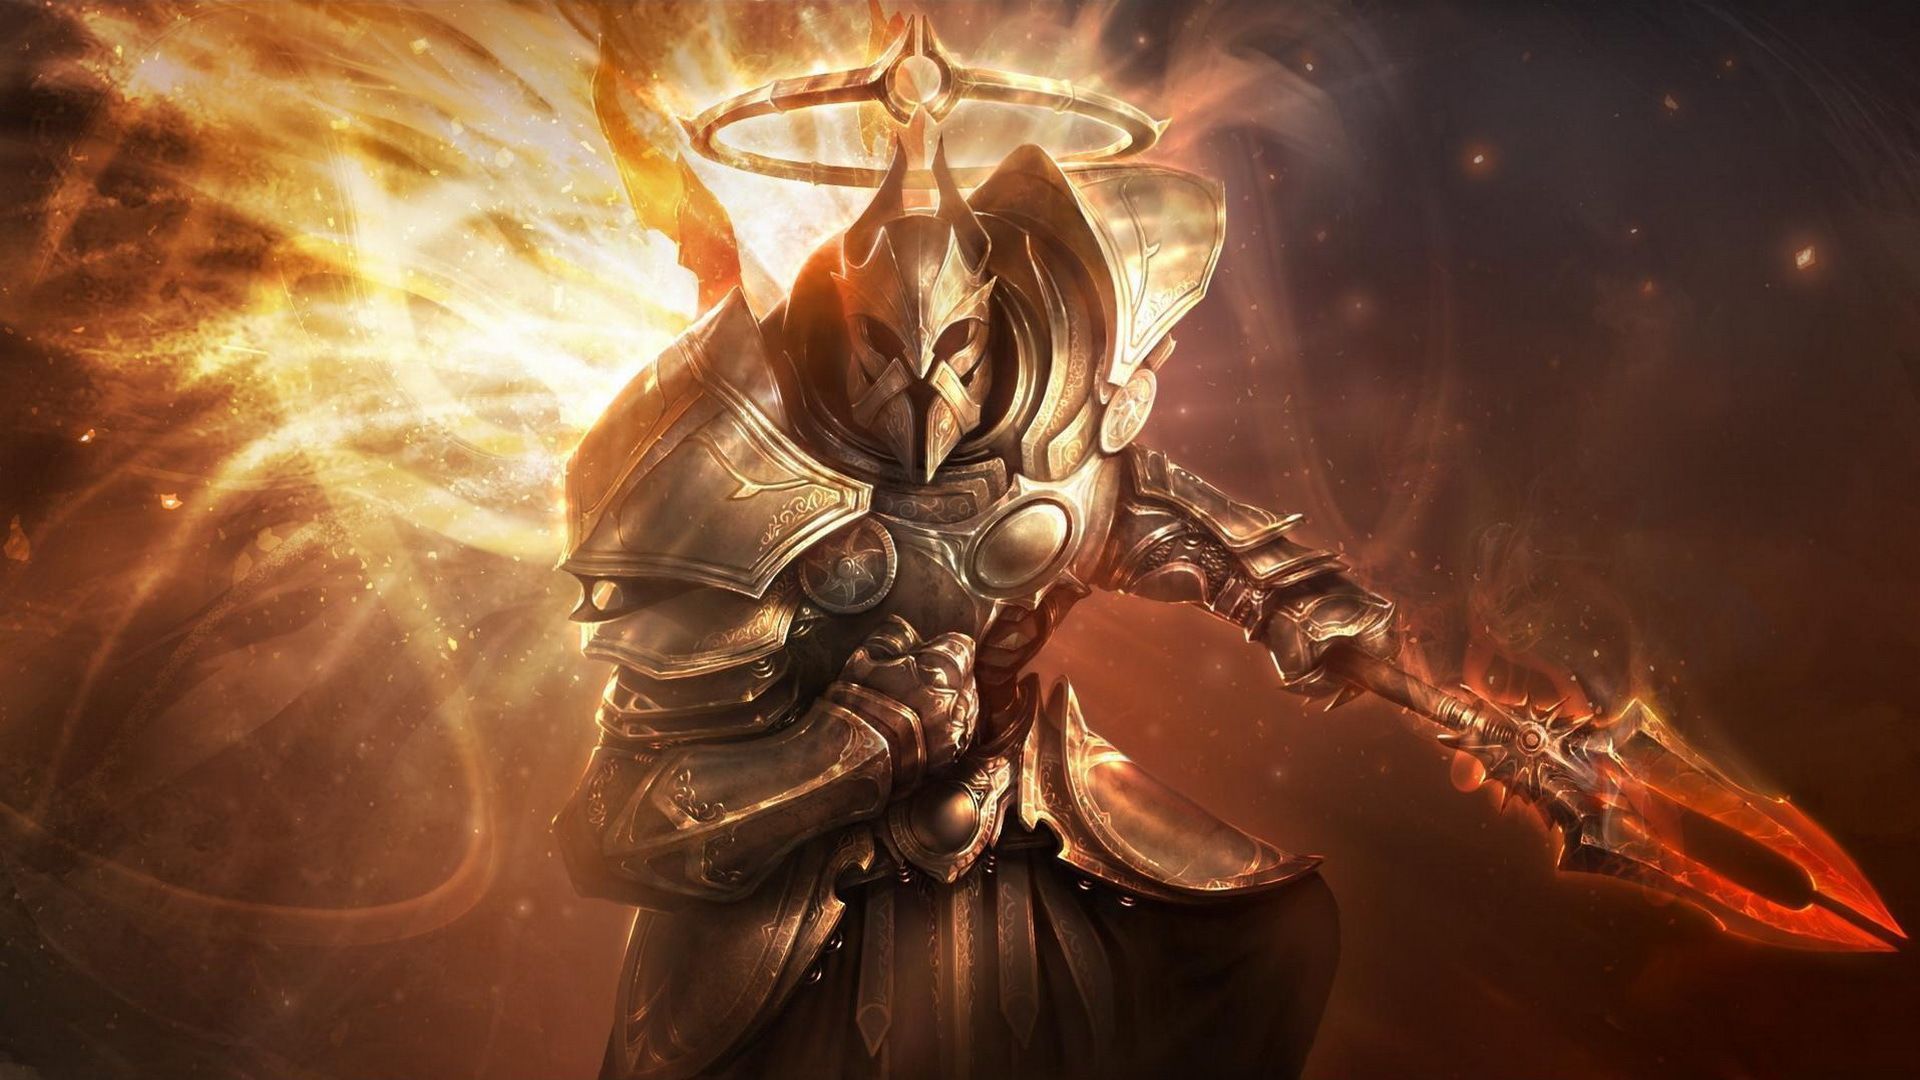 Diablo III archangel is attacking wallpapers and images